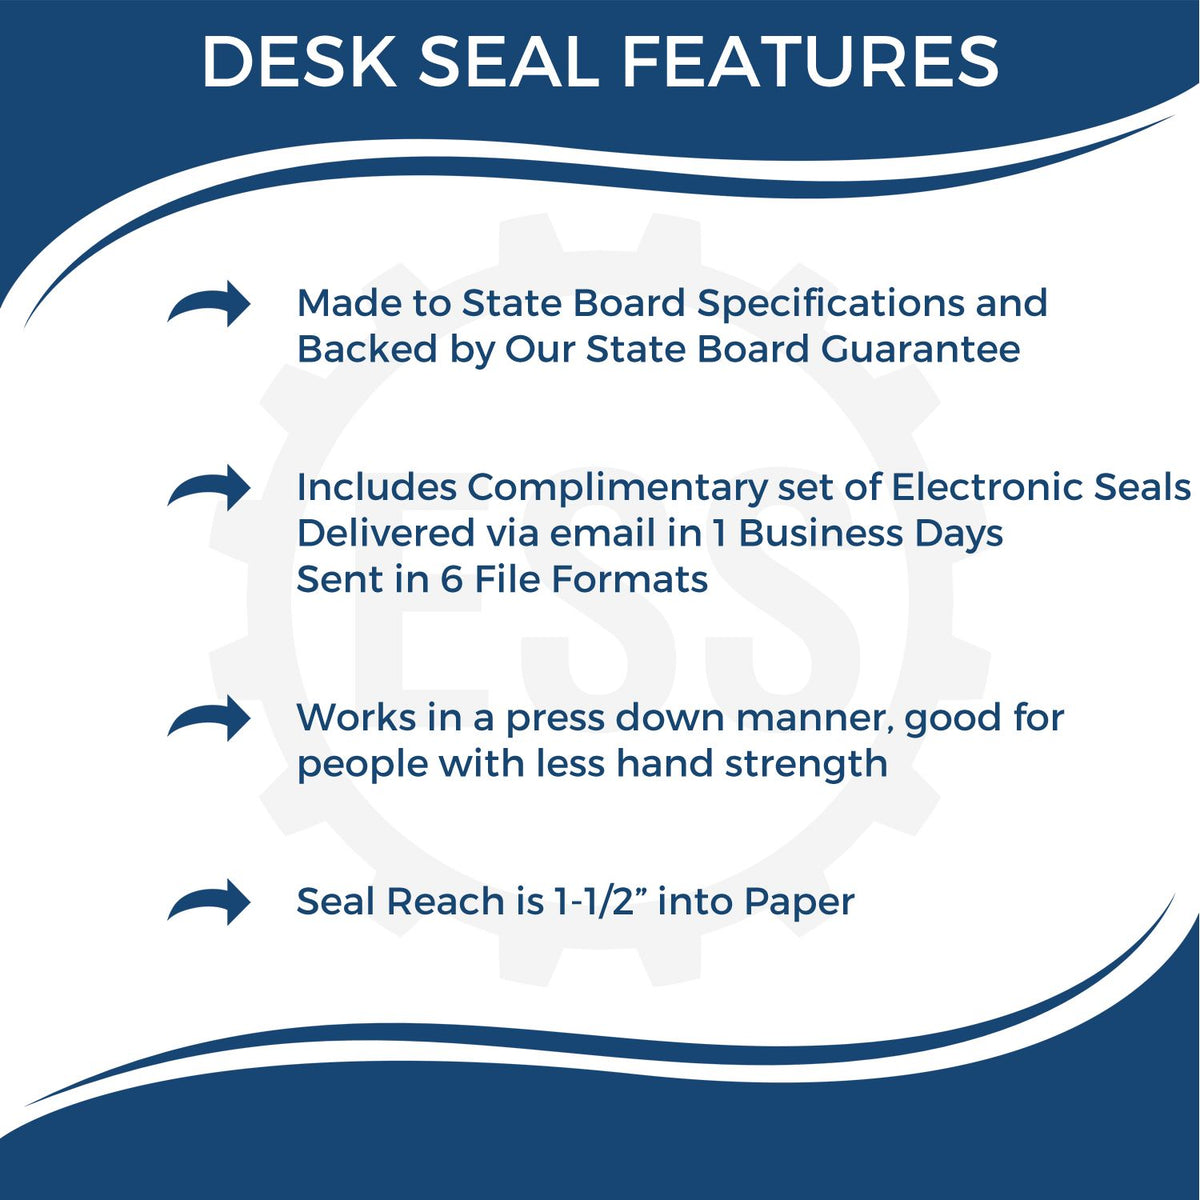 A picture of an infographic highlighting the selling points for the Maryland Engineer Desk Seal